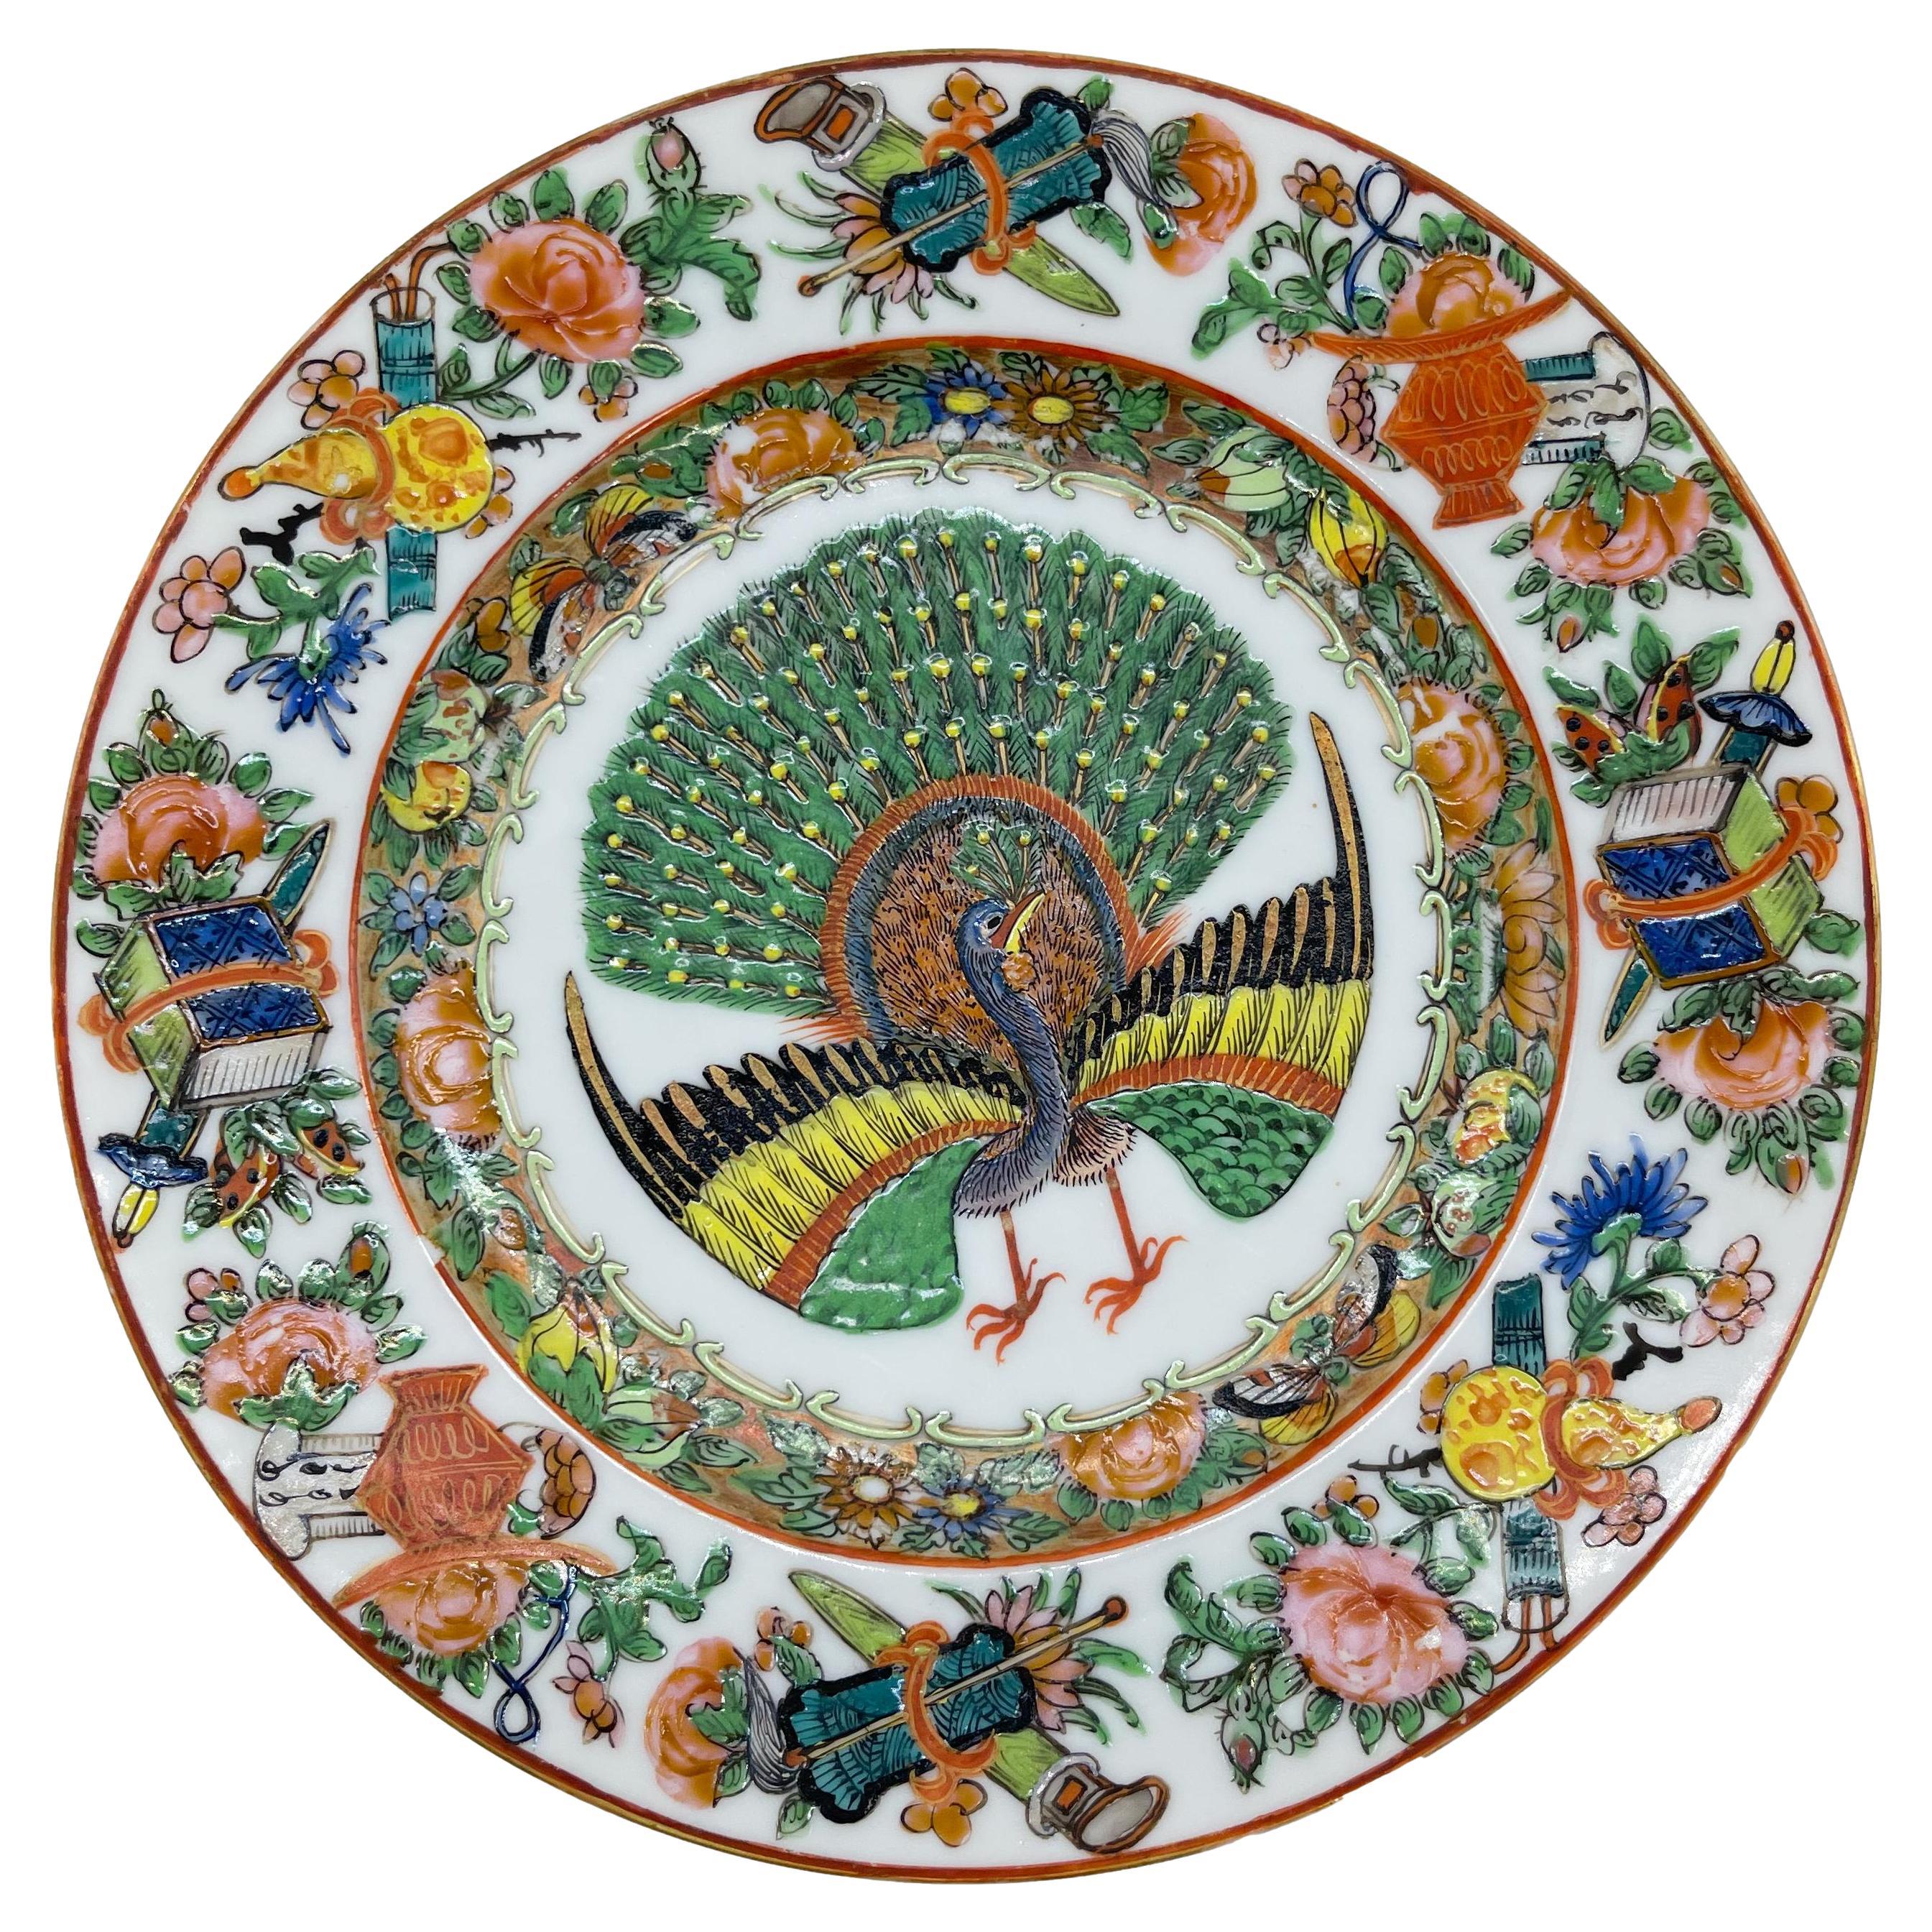 Chinese Export Canton Famille Rose Plate with Rare Central Peacock, ca. 1865